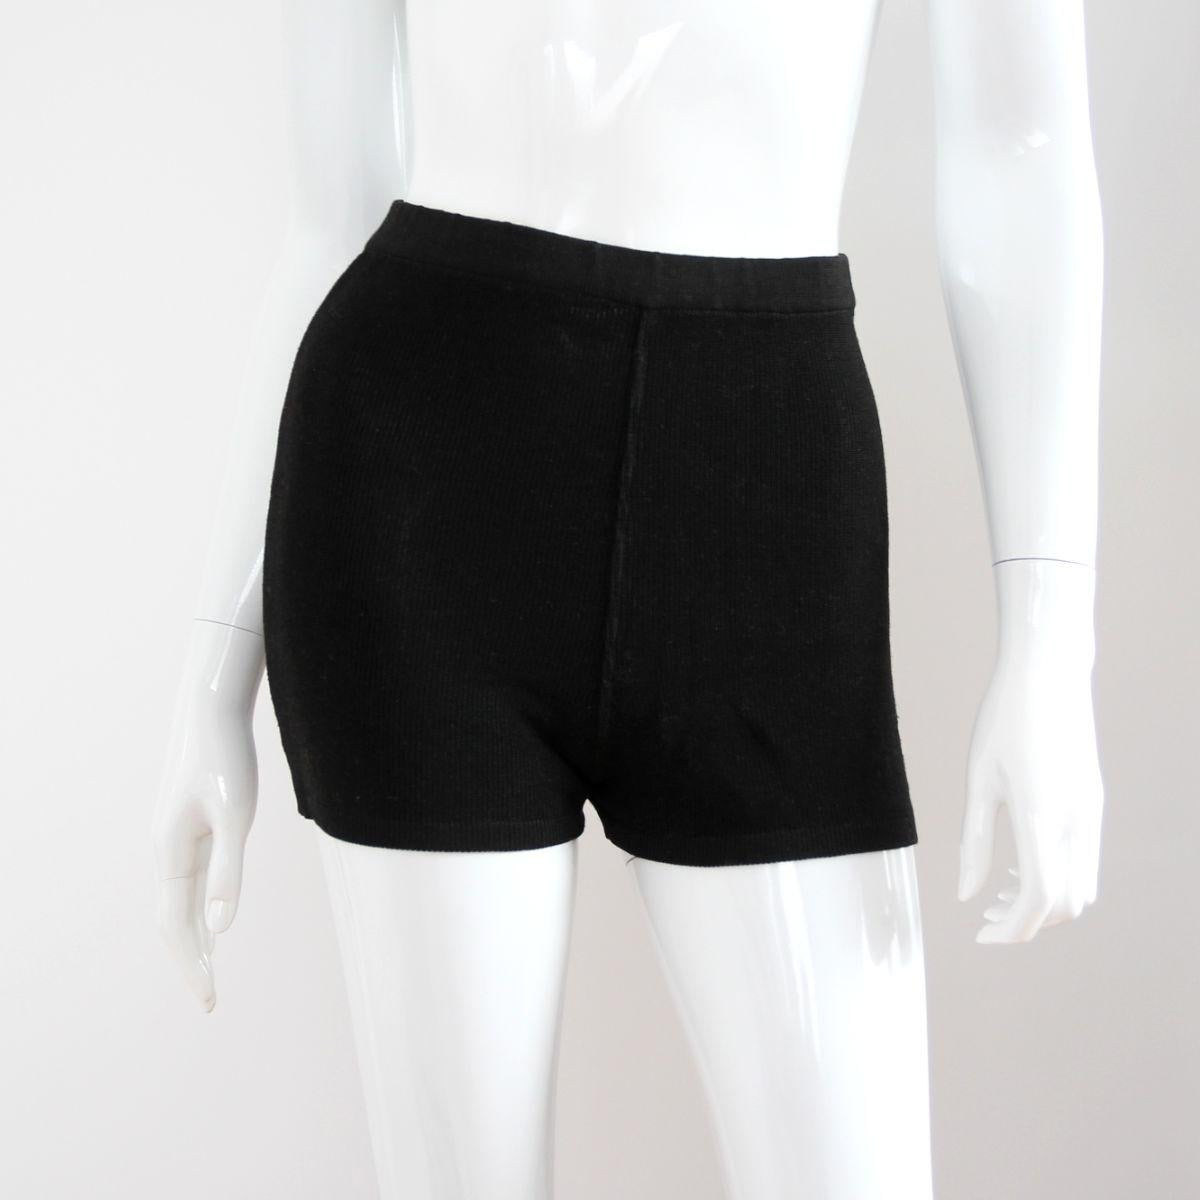 CHANEL 1996 Black Shorts / Hot Pants with CC Logo Embroidery by Karl Lagerfeld 1